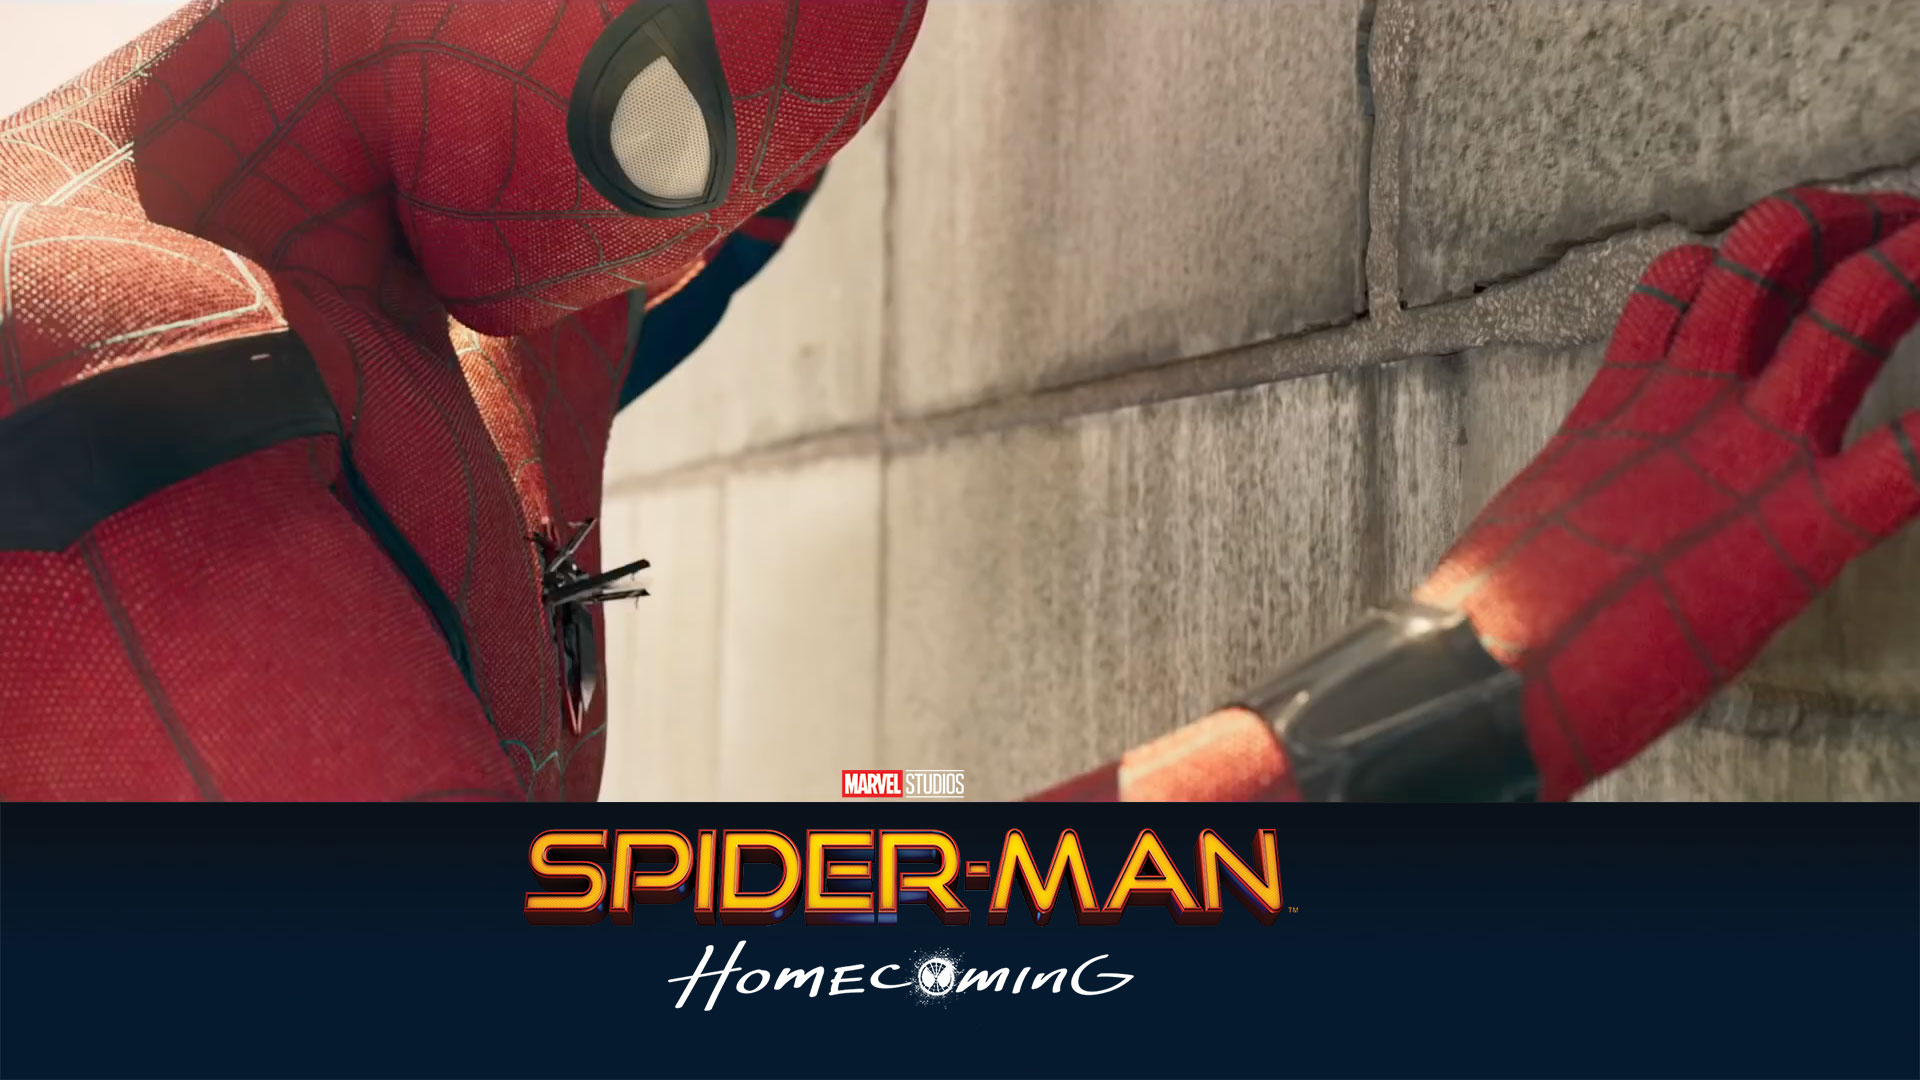 Spider-Man: Homecoming (2017) Movie | Desktop Wallpapers HD Quality1920 x 1080